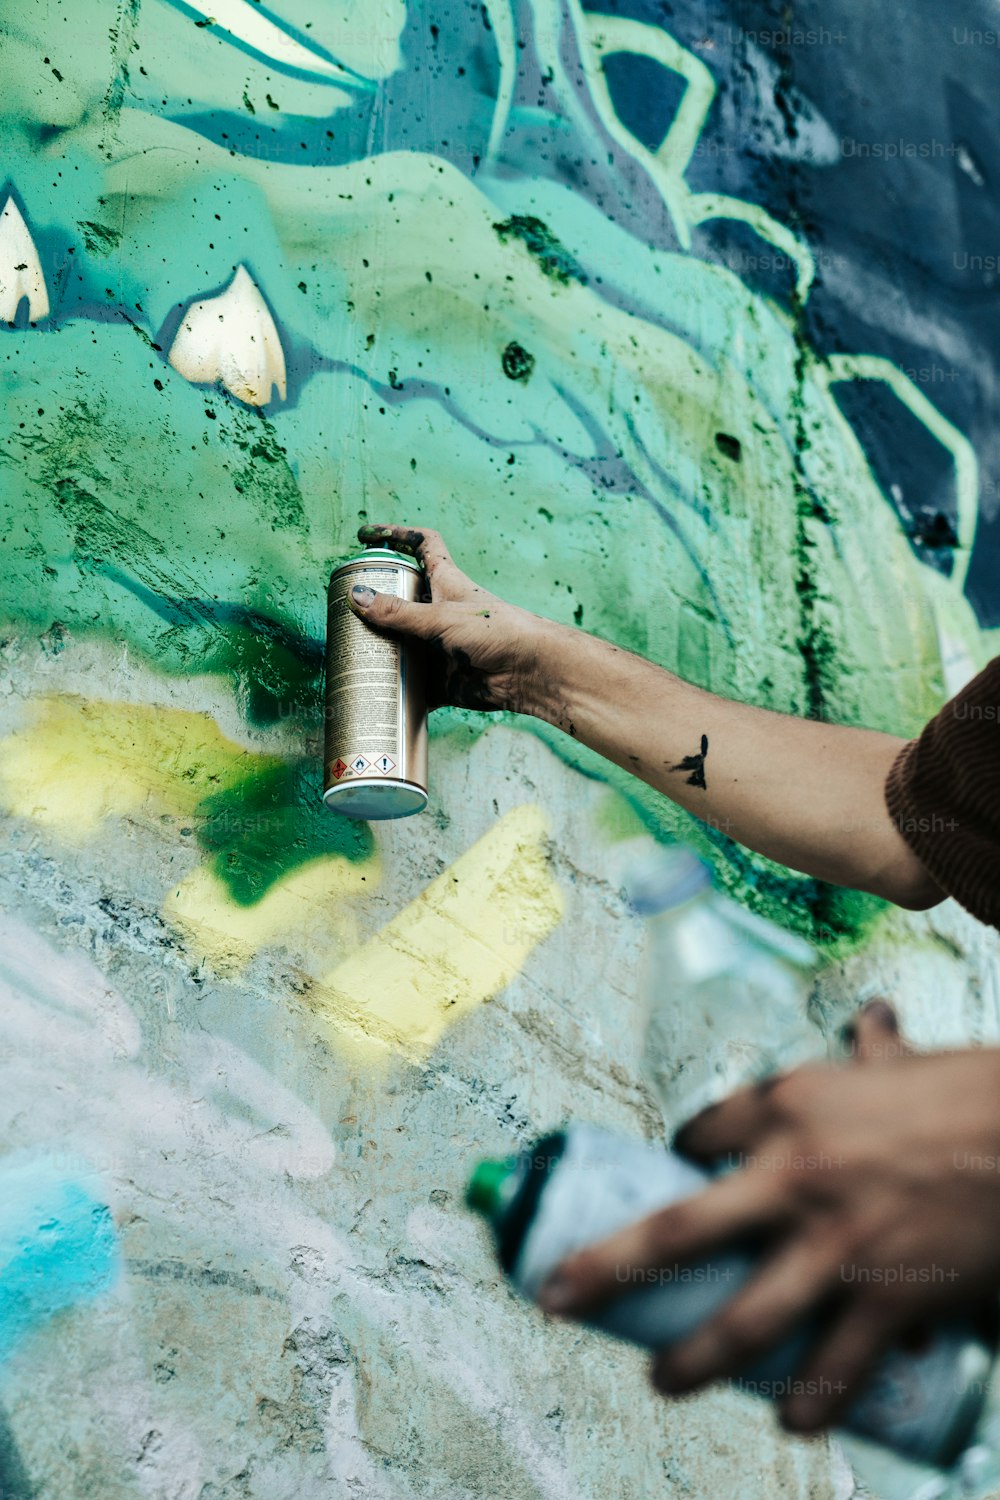 a person spray painting a wall with green and blue colors